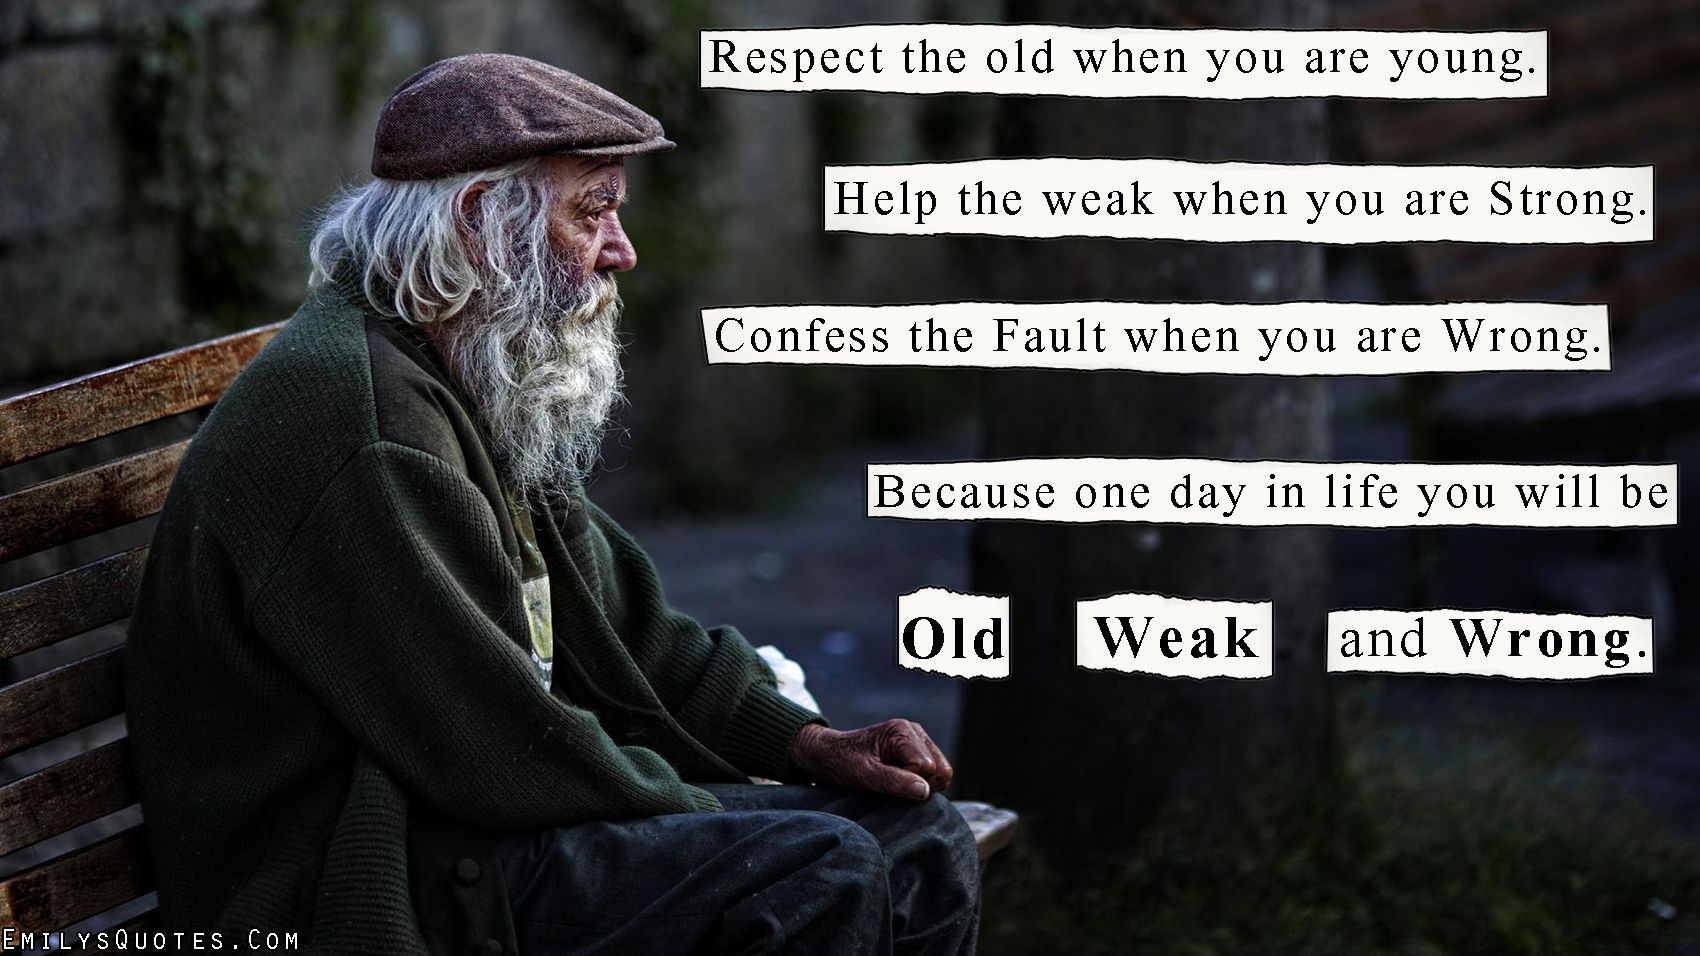 Respect the old when you are young. Help the weak when you are strong. Confess your fault when you are wrong because one day in life you will be old, weak and wrong